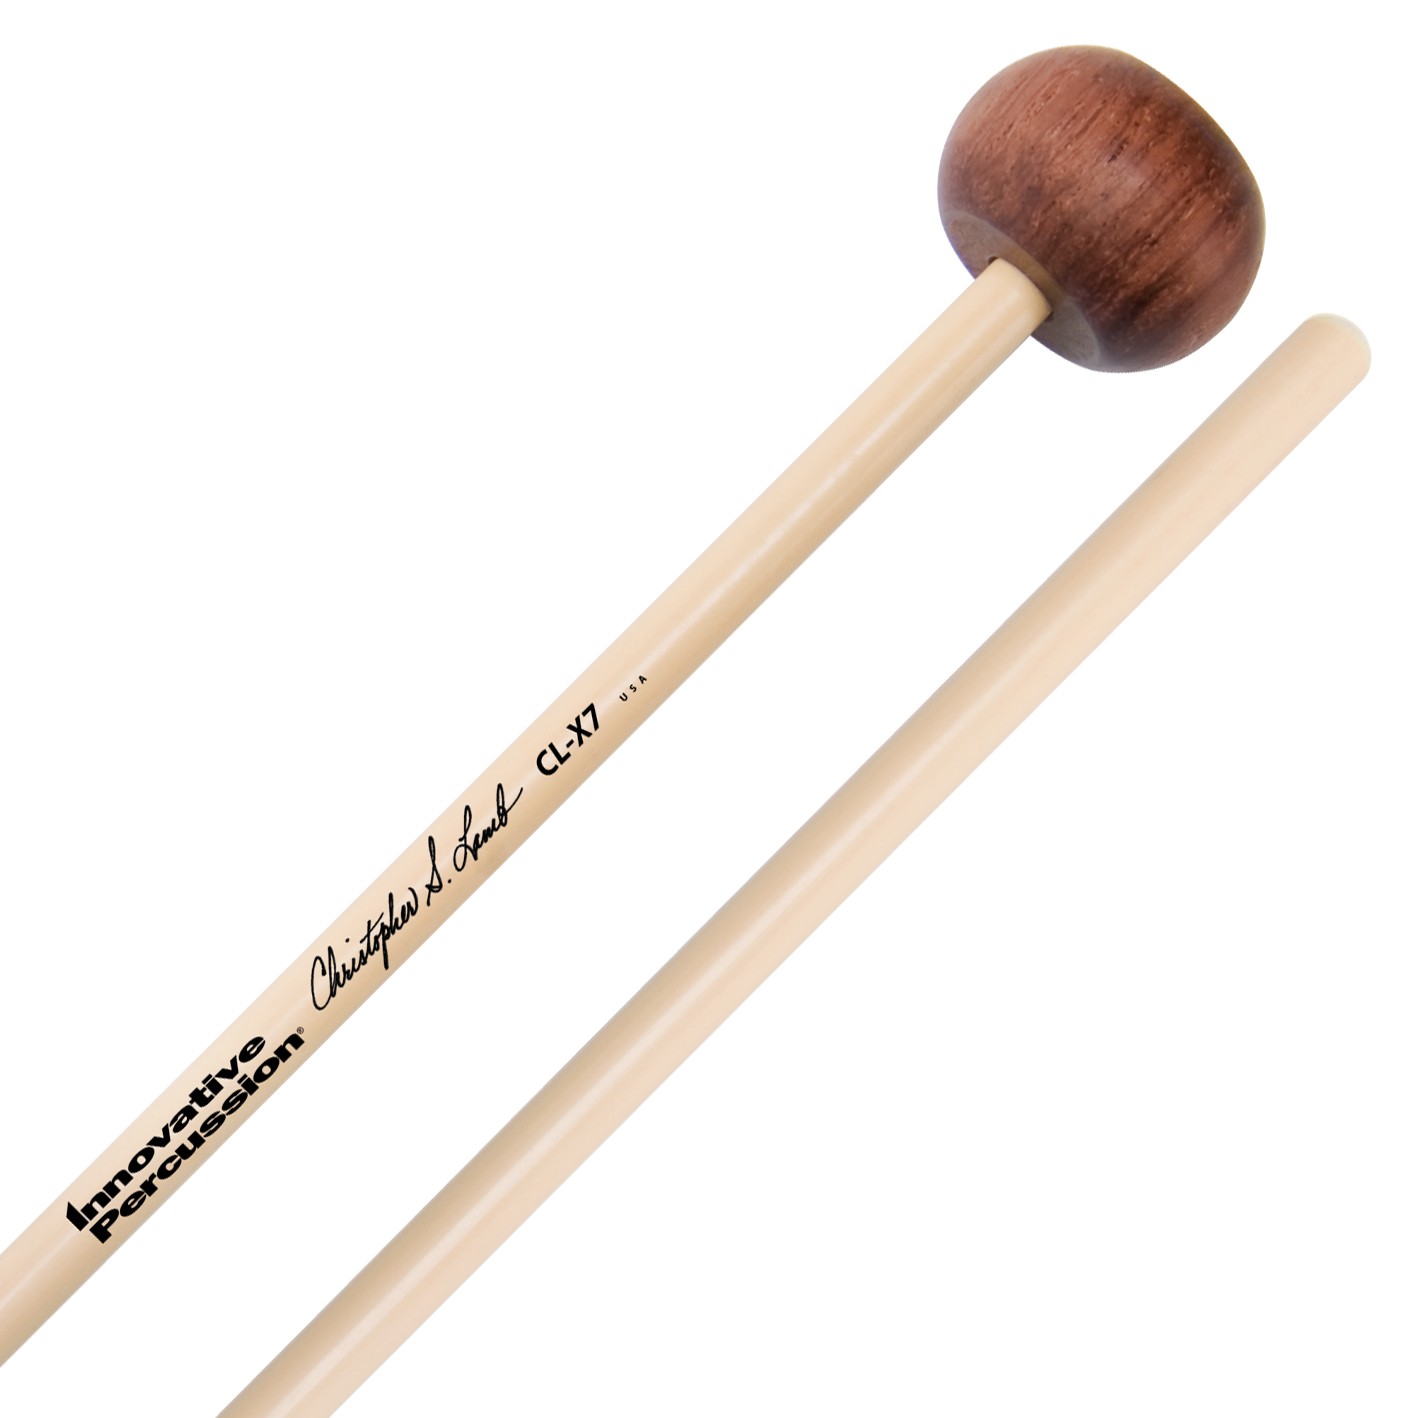 Innovative Percussion CL-X7 Christopher Lamb Orchestral Series Medium Rosewood Xylophone Mallets